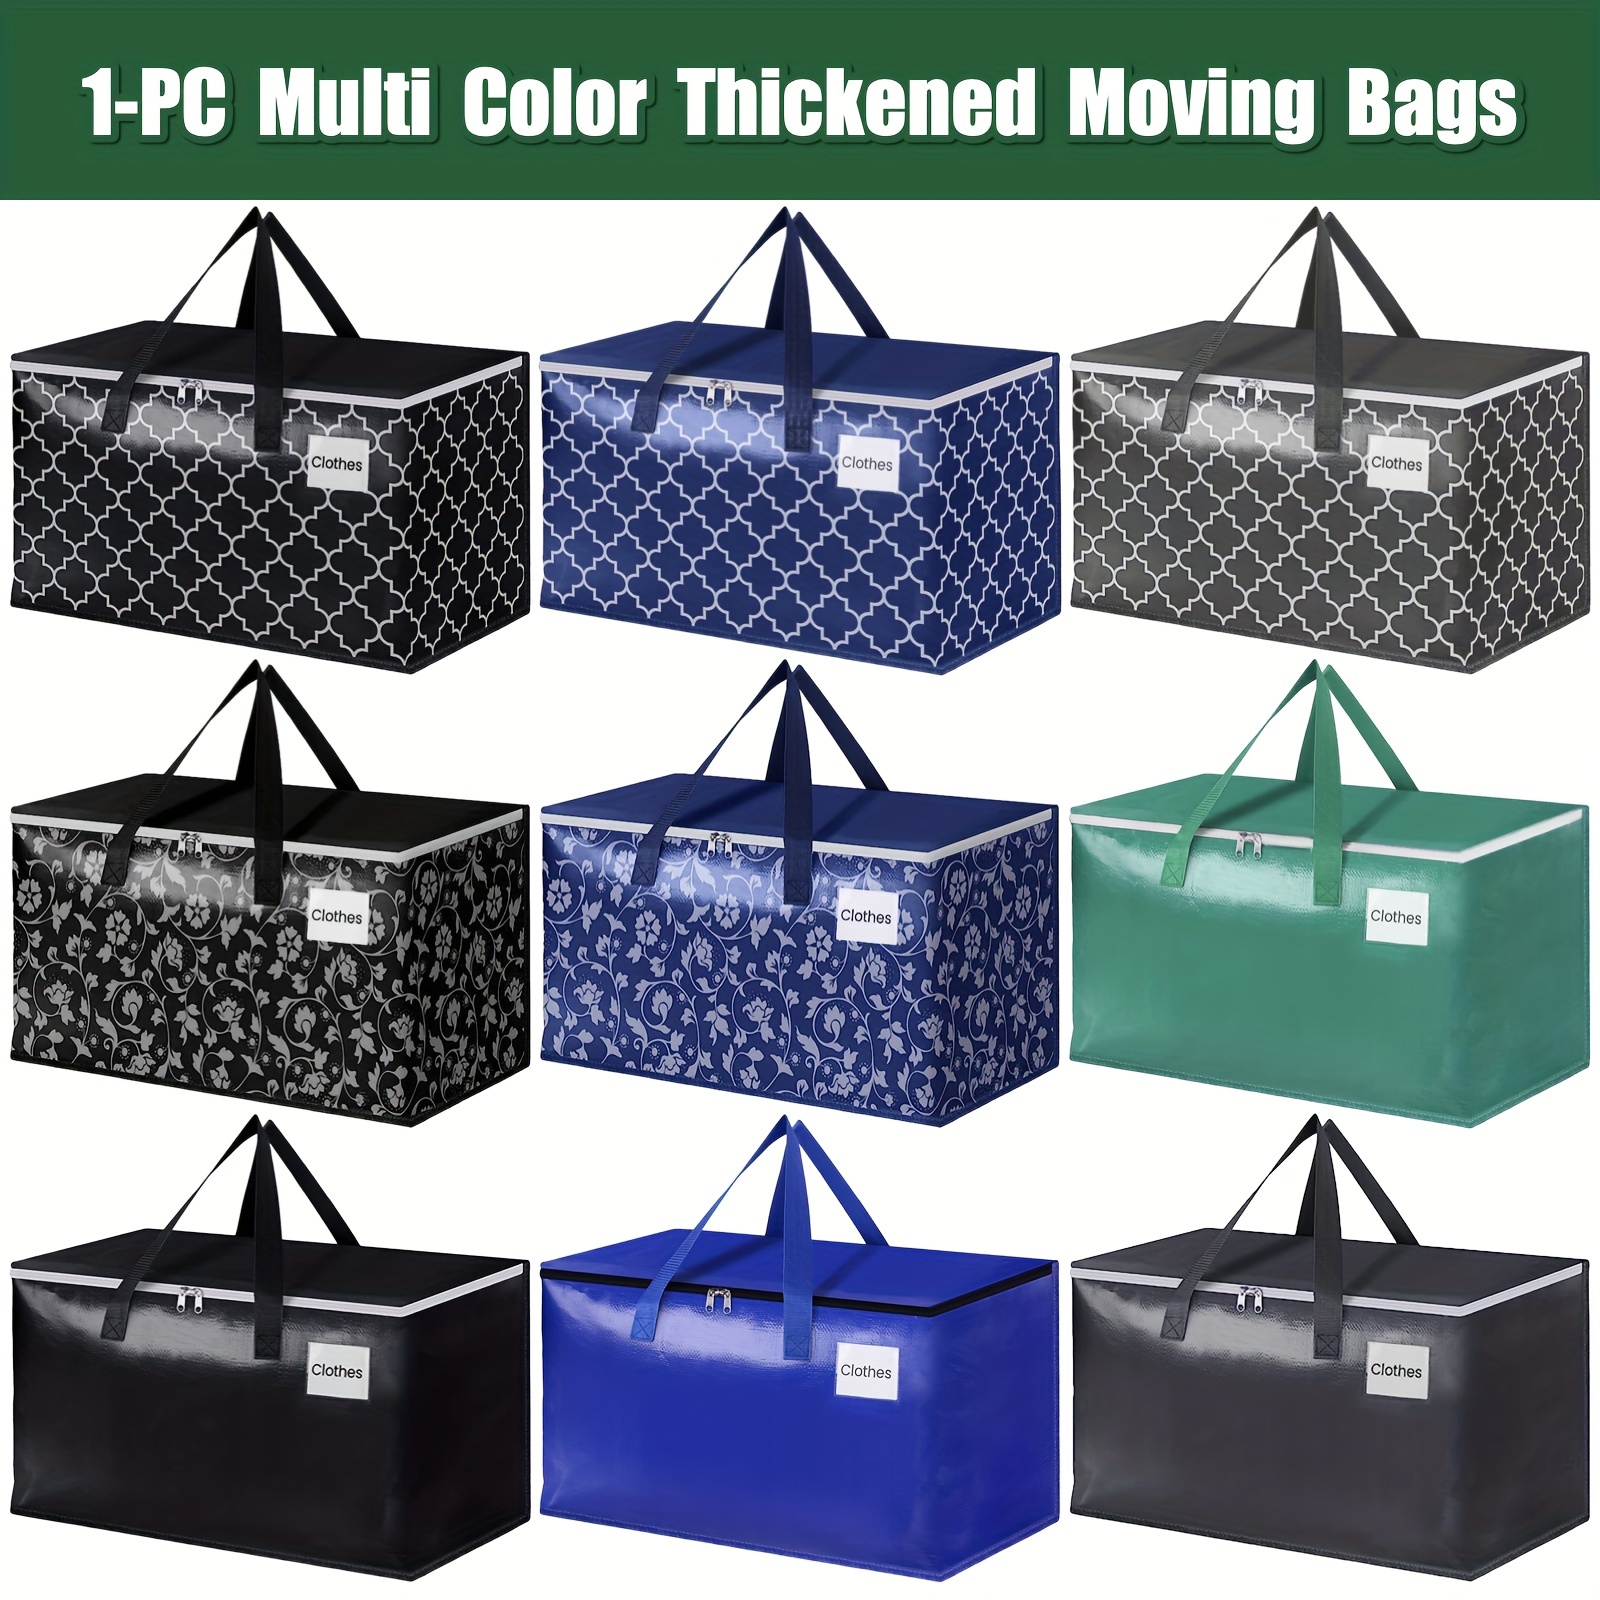 8 Pcs Clear Zippered Organizers 12''x12''x12'' Moving Bags with Reinforced  Handles Heavy Duty Storage Cube Tote Storage Blanket Bags Bins for Clothes